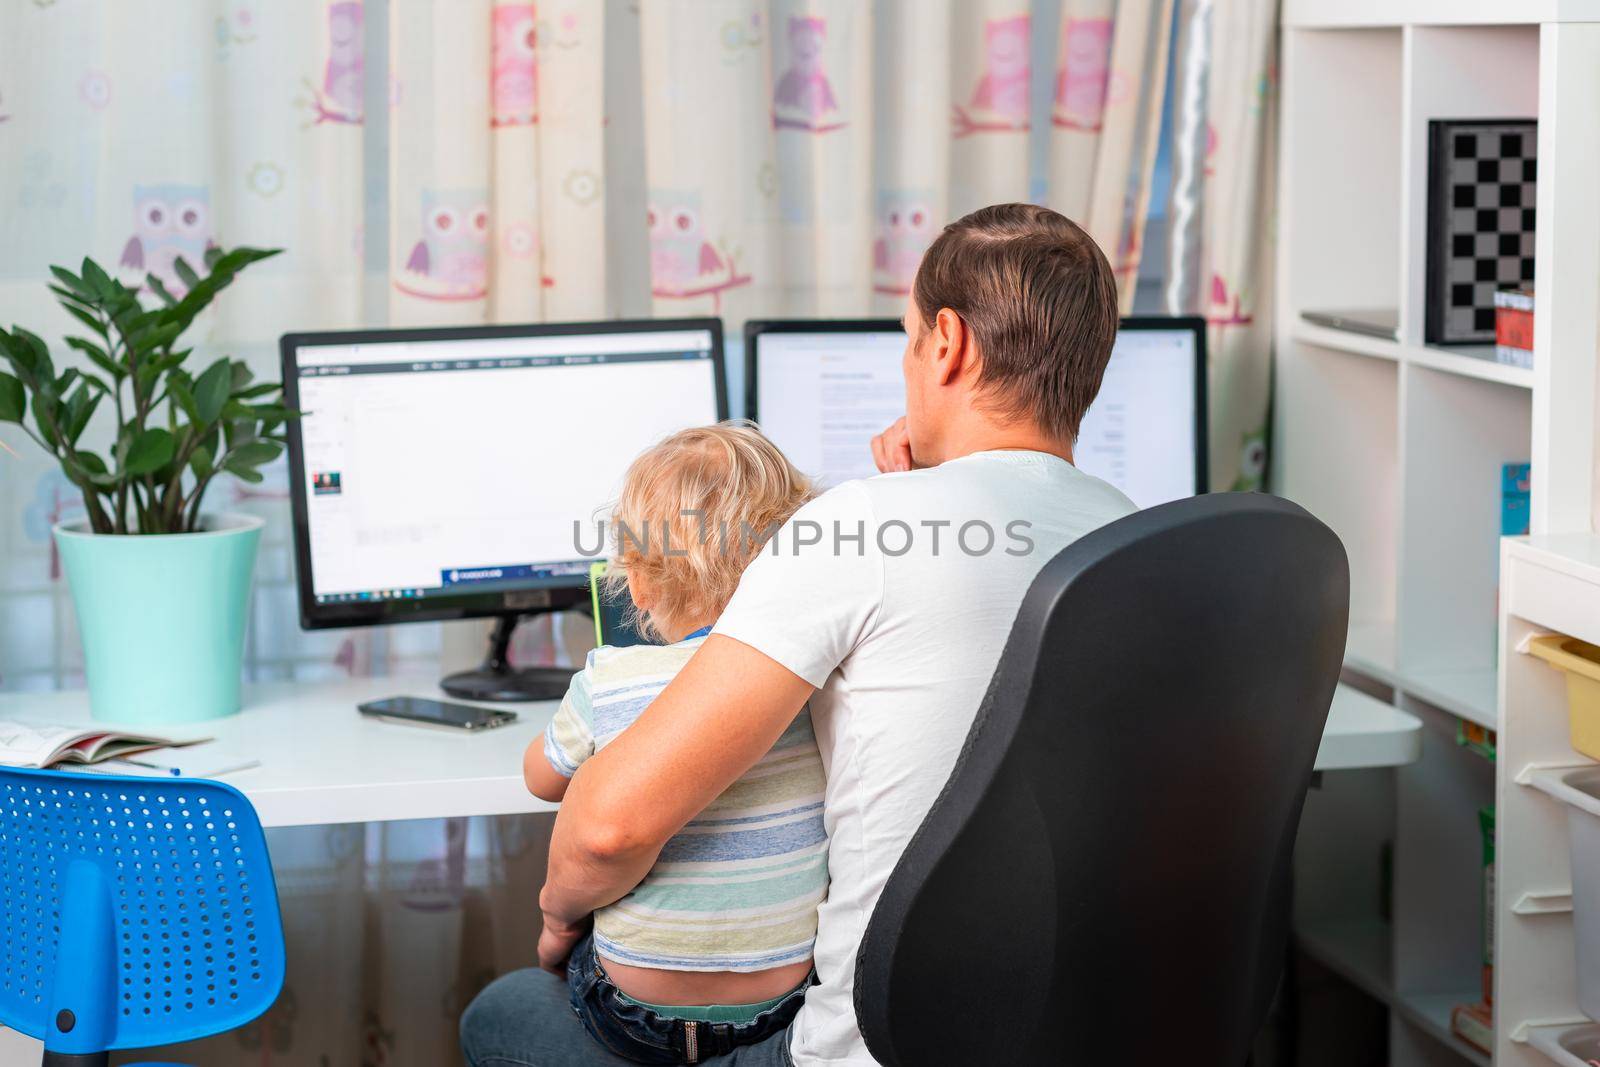 Father with kid trying to work from home during quarantine. Stay at home, work from home concept during coronavirus pandemic